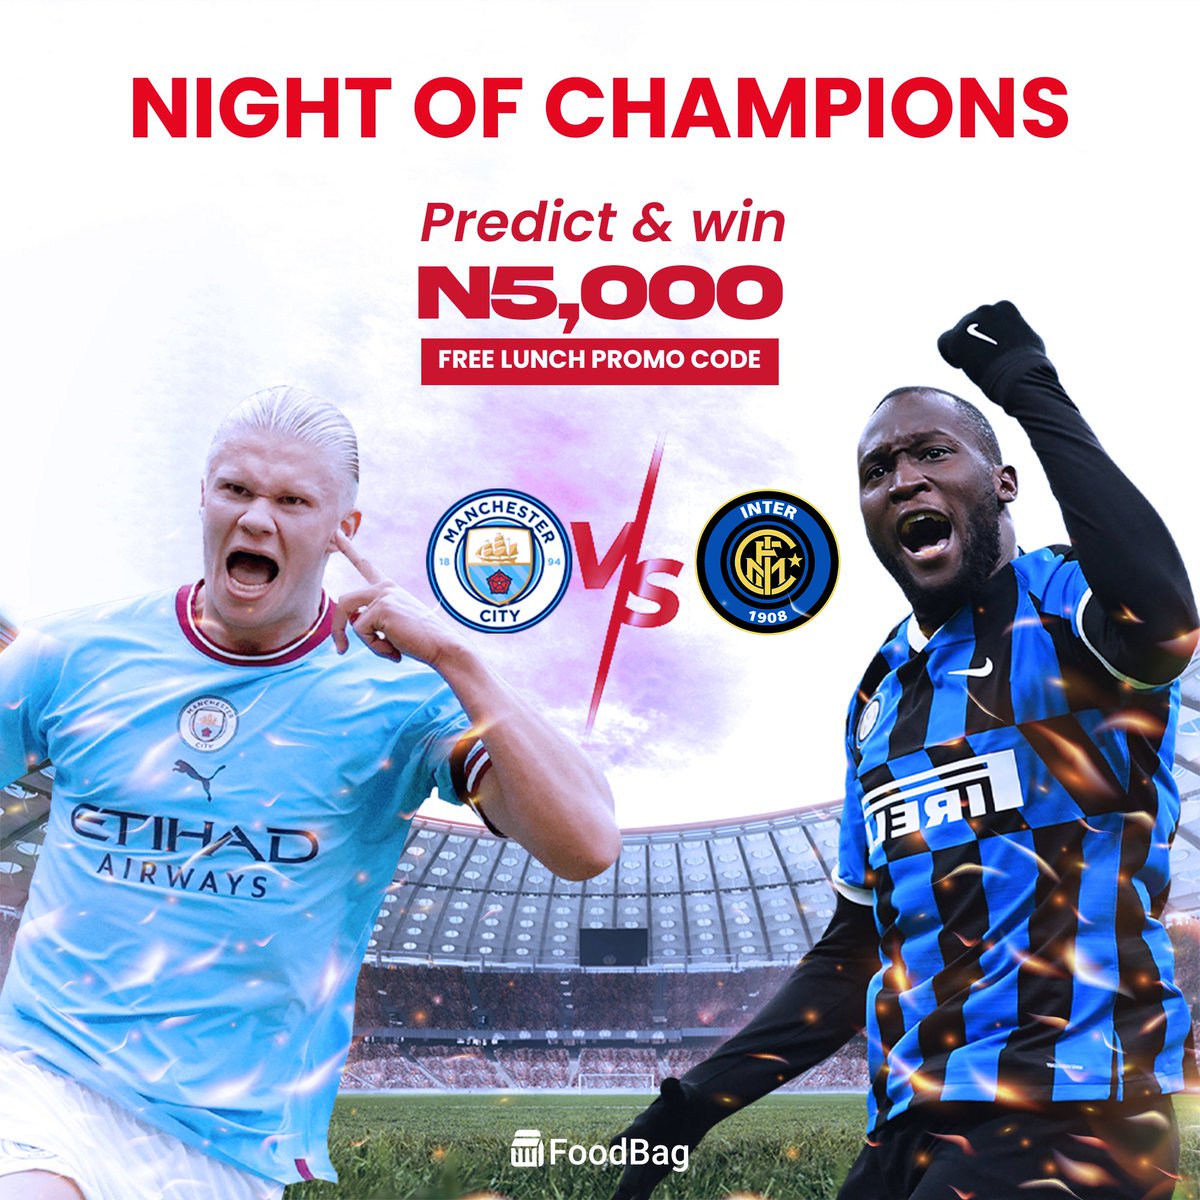 Predict correctly the scoreline in the comment section and stand a chance to win Free lunch Promo code worth ₦5,000 credited to your FoodBag wallet..💦

 Predictions closes before the start of the match...💯💯
#championsleaguefinal #manchestercityfc #intermilan #predictandwin